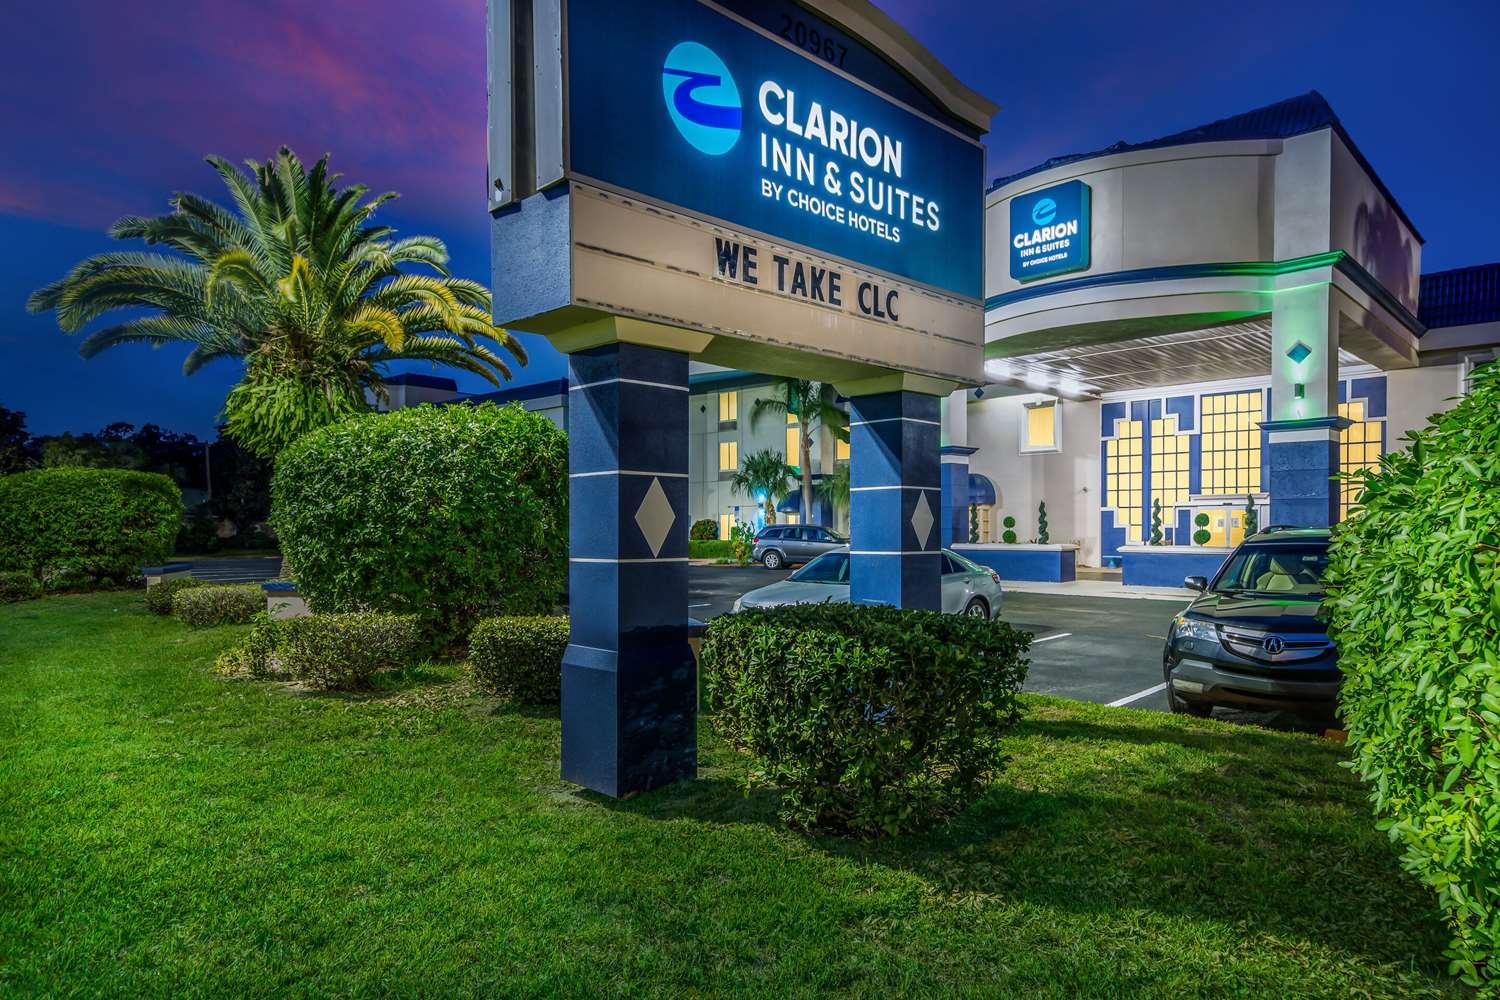 Clarion Inn and Suites Clearwater Central in Clearwater, FL